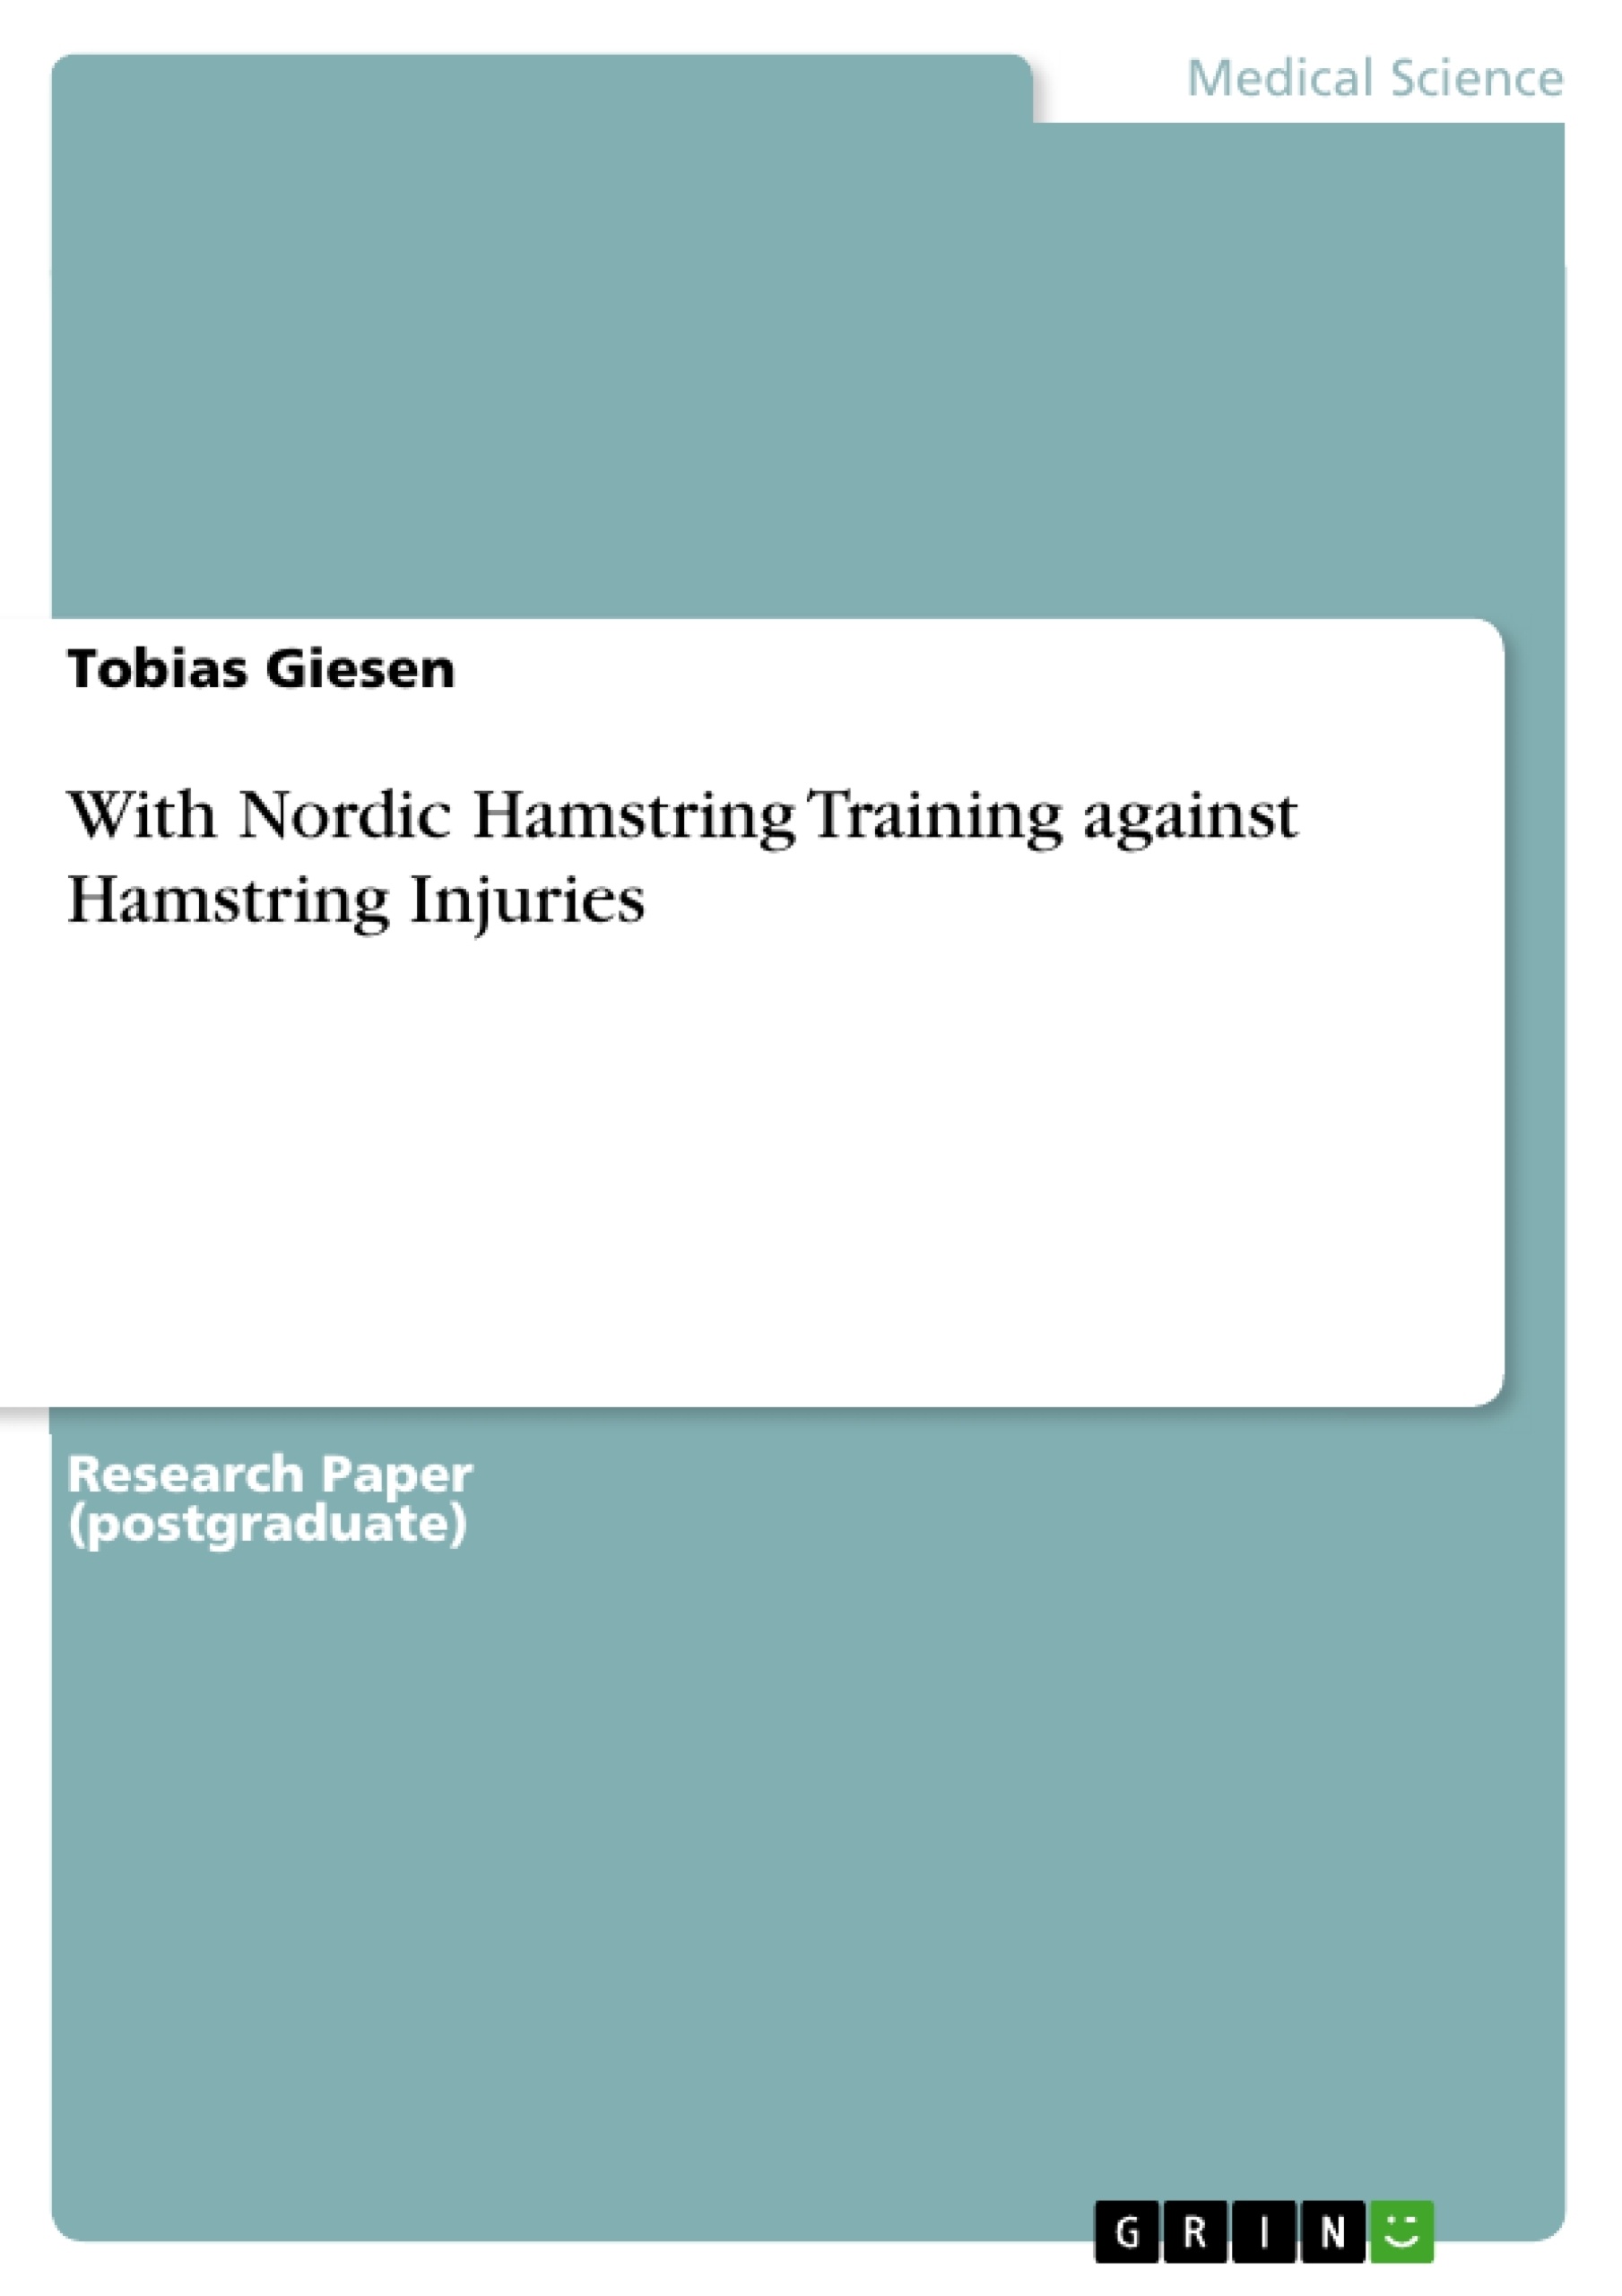 Title: With Nordic Hamstring Training against Hamstring Injuries